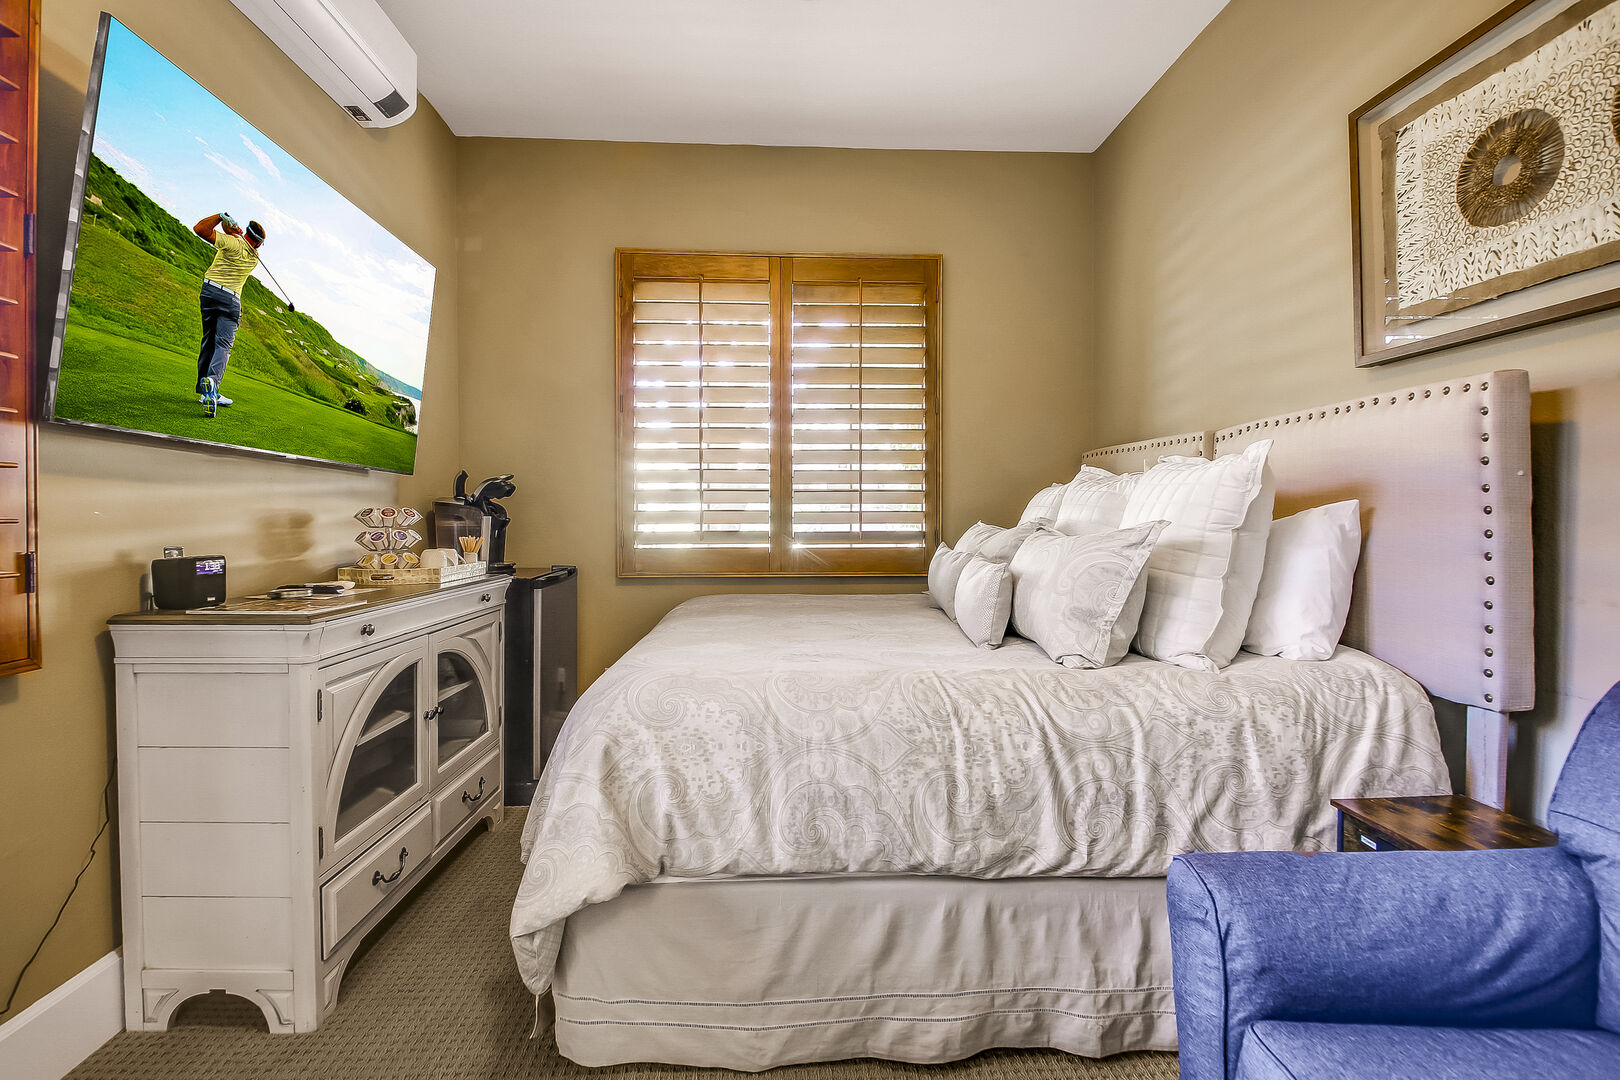 Casita Suite 2 is located to the left of the courtyard gate and features a King-sized Bed, a Full-sized Sofa Sleeper, 65-inch Samsung 4K Smart television and a reach-in closet.